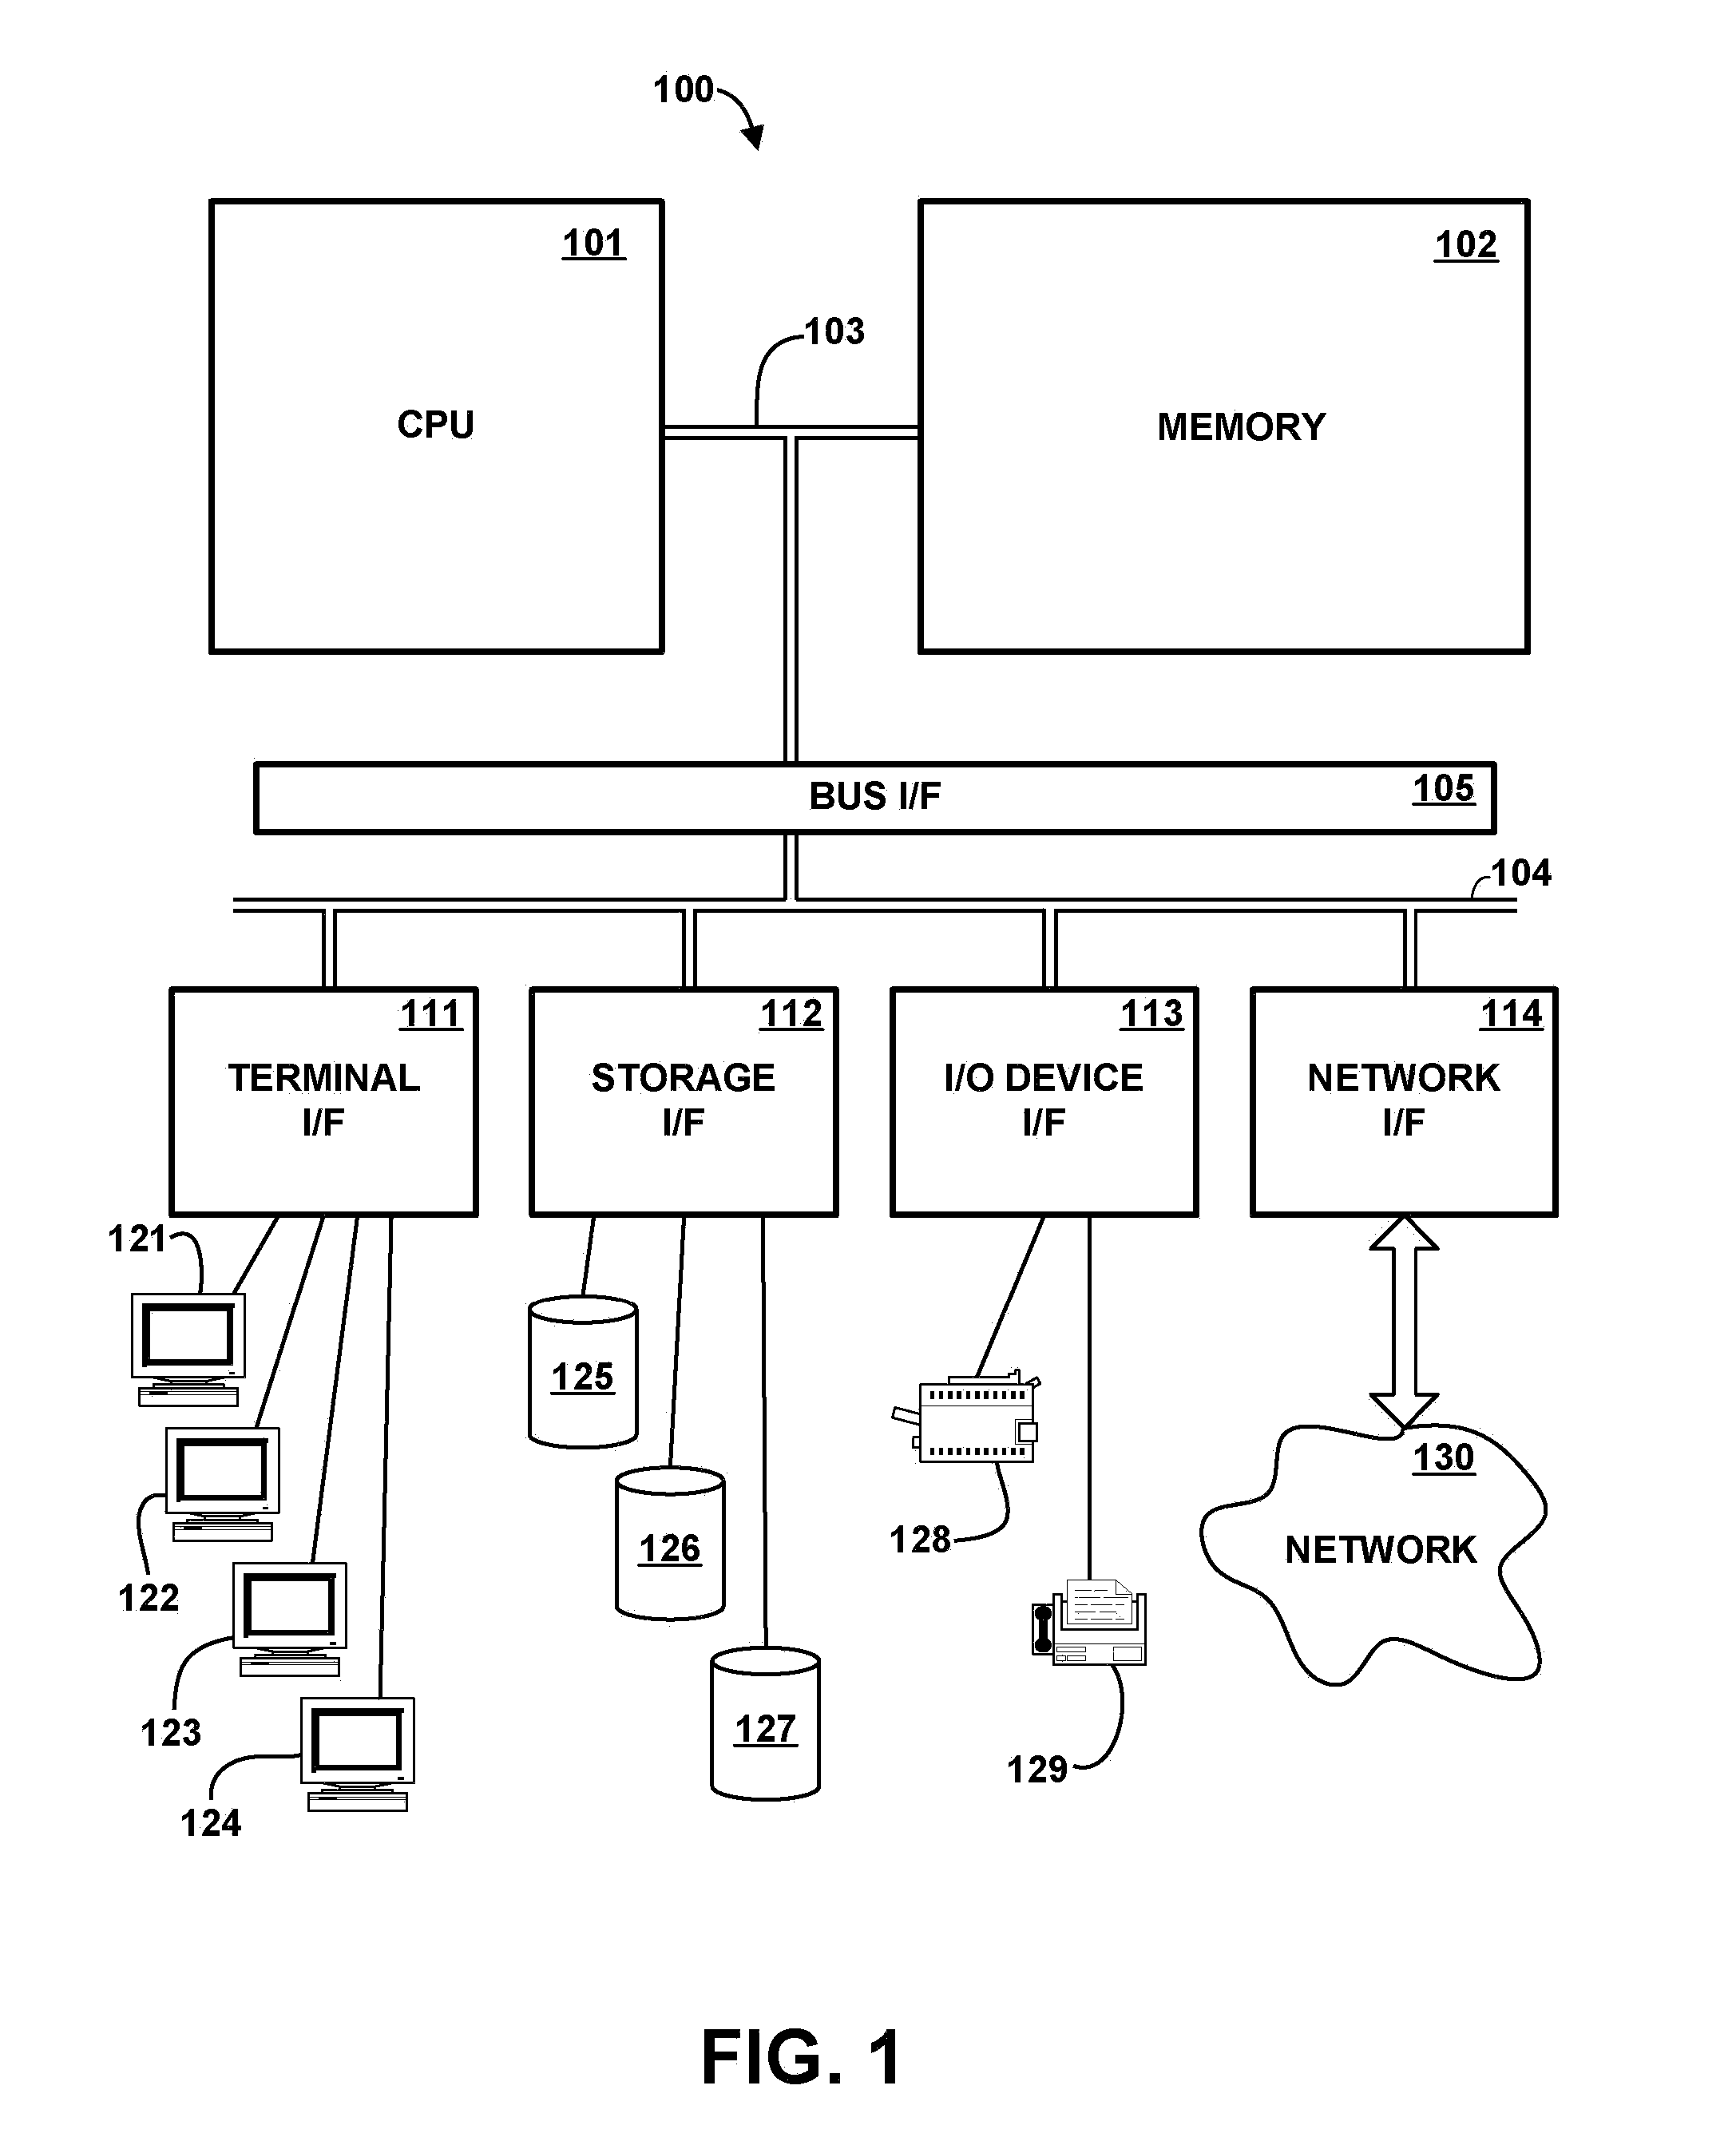 Method and Apparatus for Breakpoint Analysis of Computer Programming Code Using Unexpected Code Path Conditions